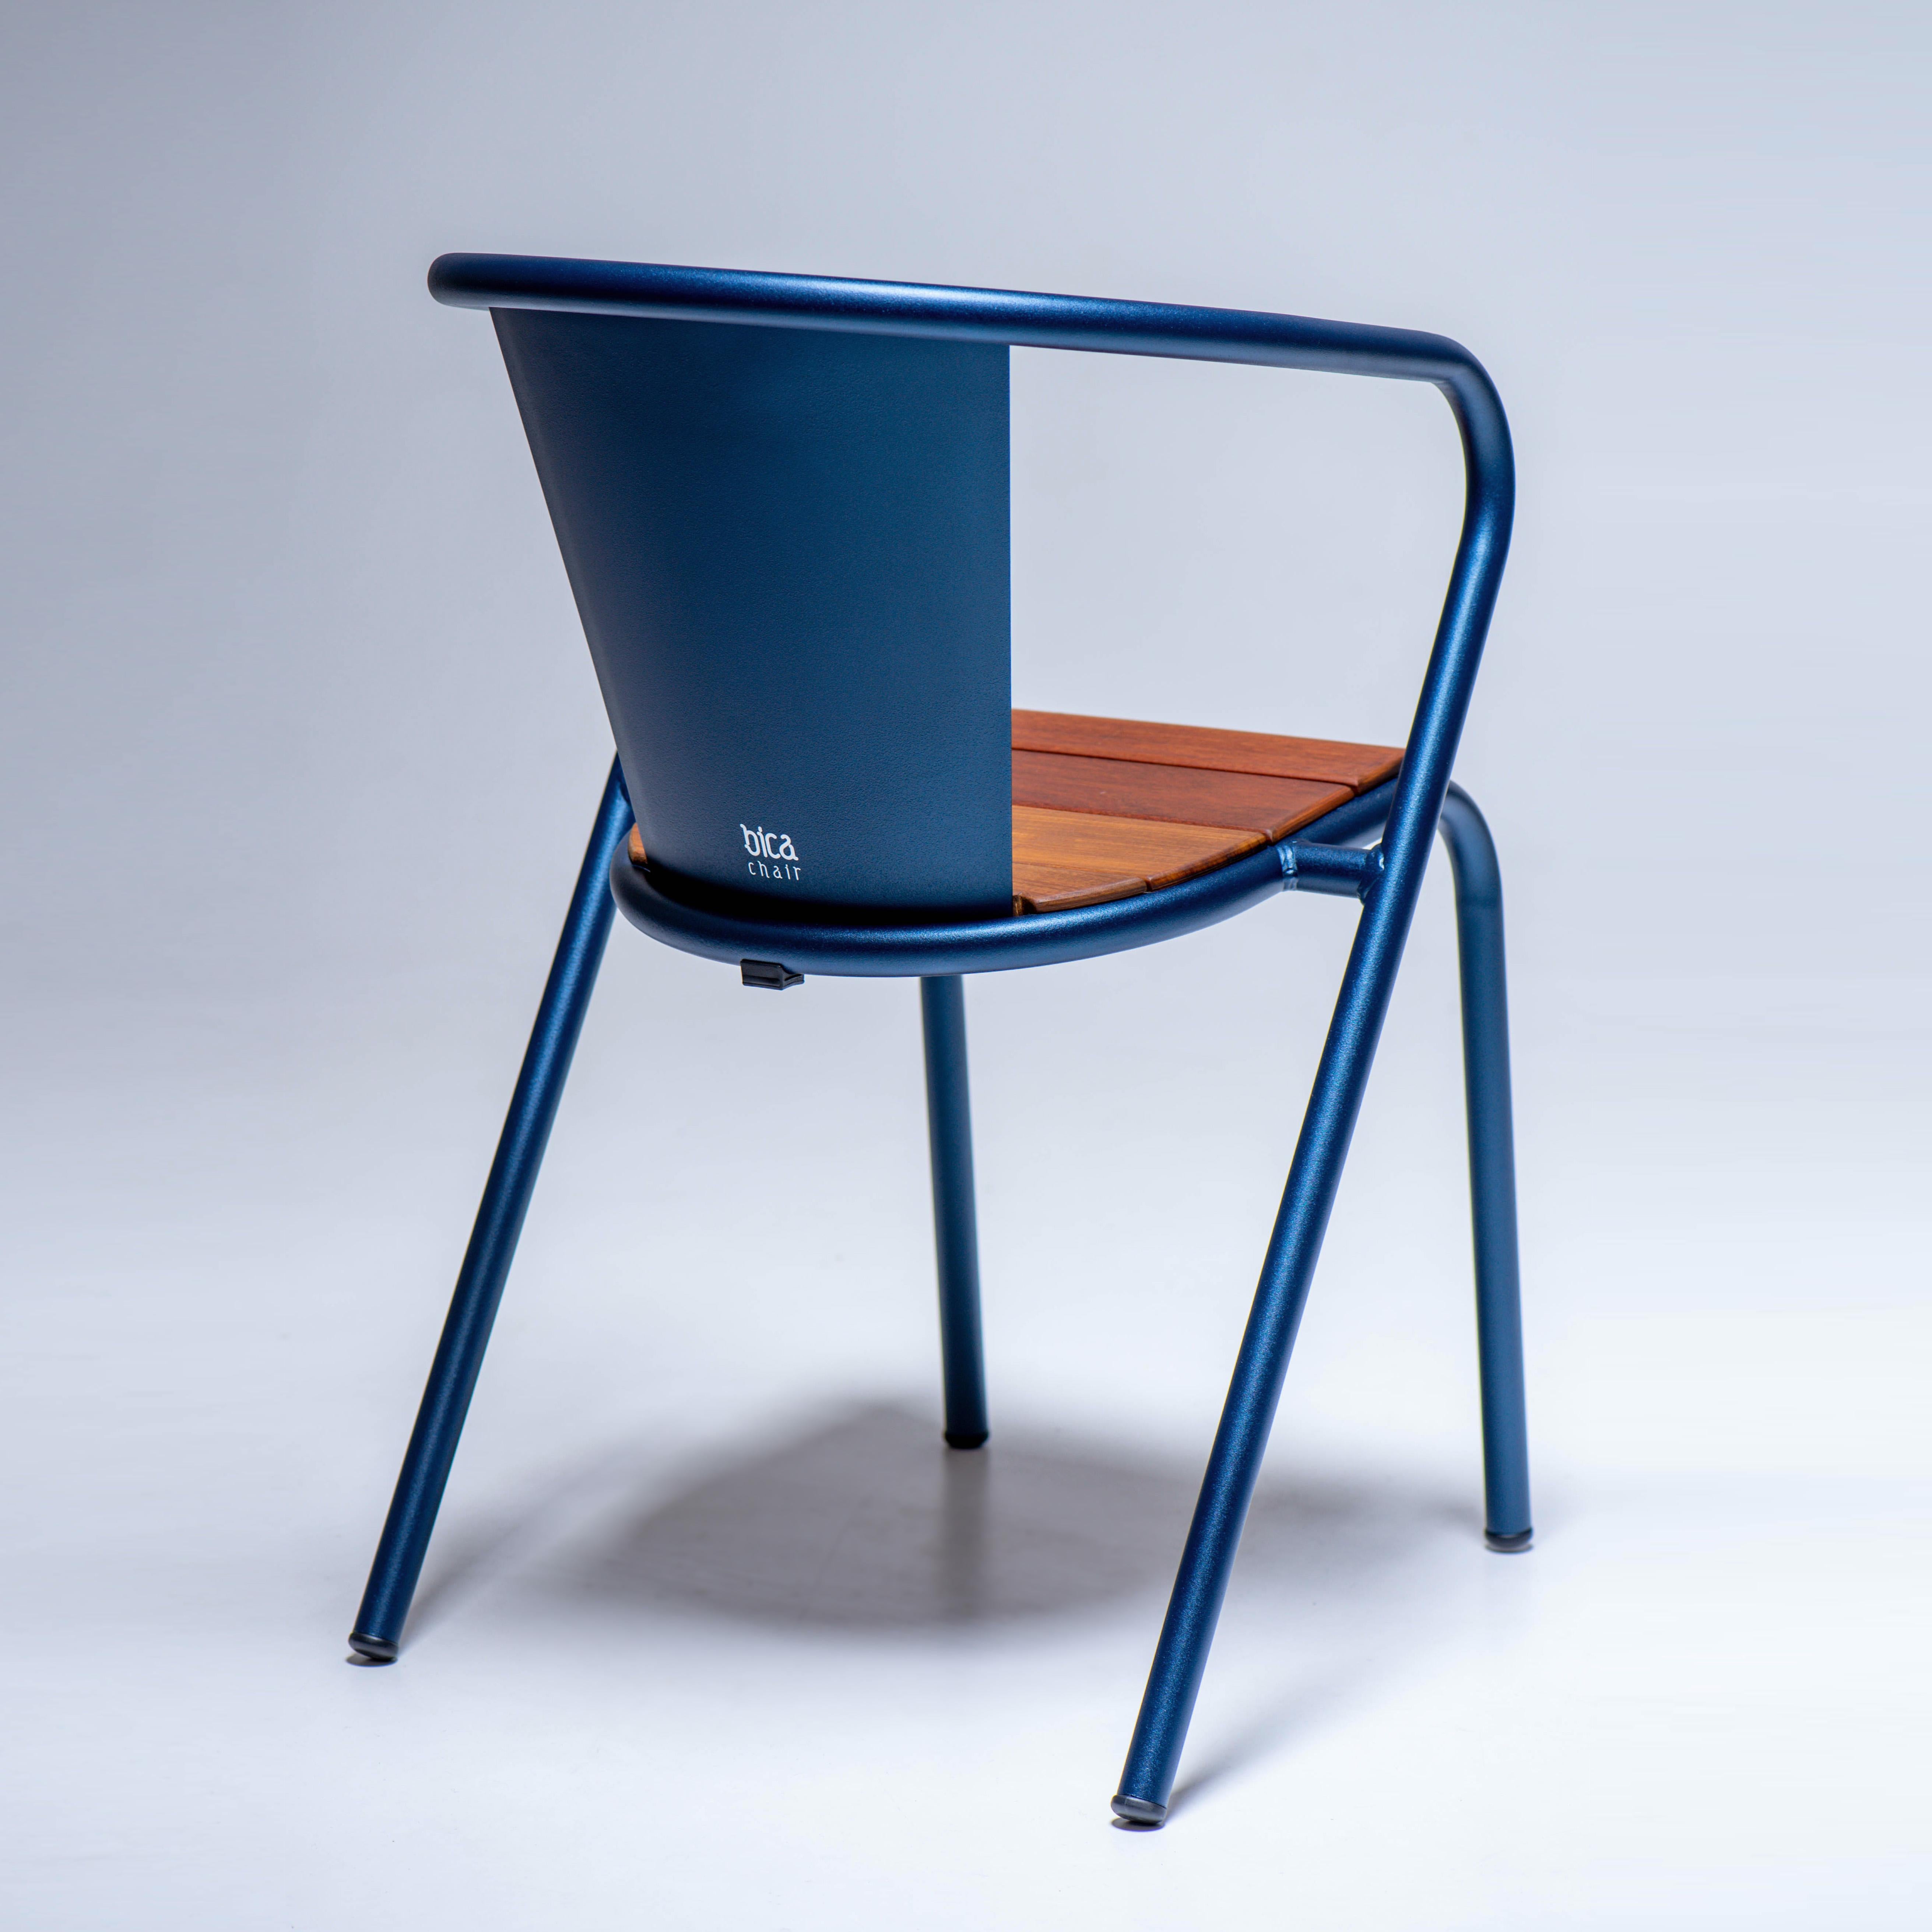 BICAchair is a sustainable stackable steel armchair made for the outdoors from recycled and recyclable steel and finished with our premium selection of powder-coating colors, in this case in a texturized Deep Blue color, that transforms a Classic in